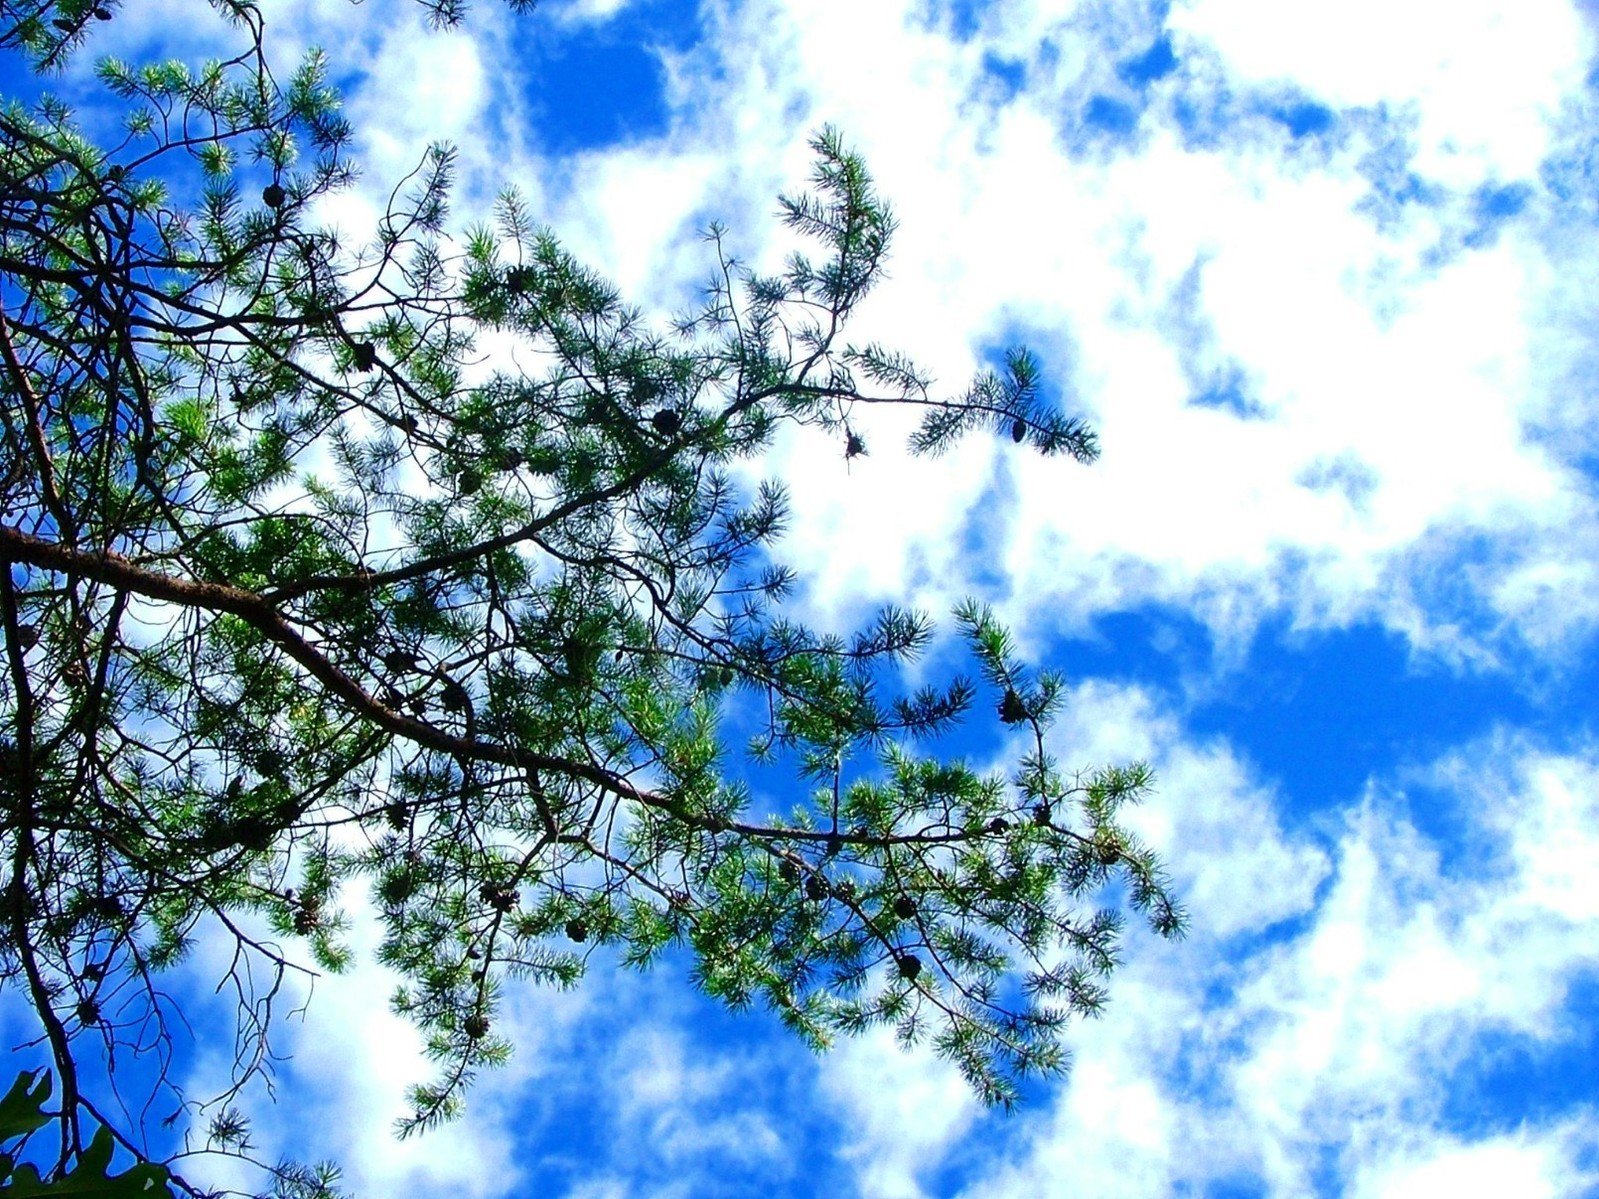 an image of the sky through nches of a tree